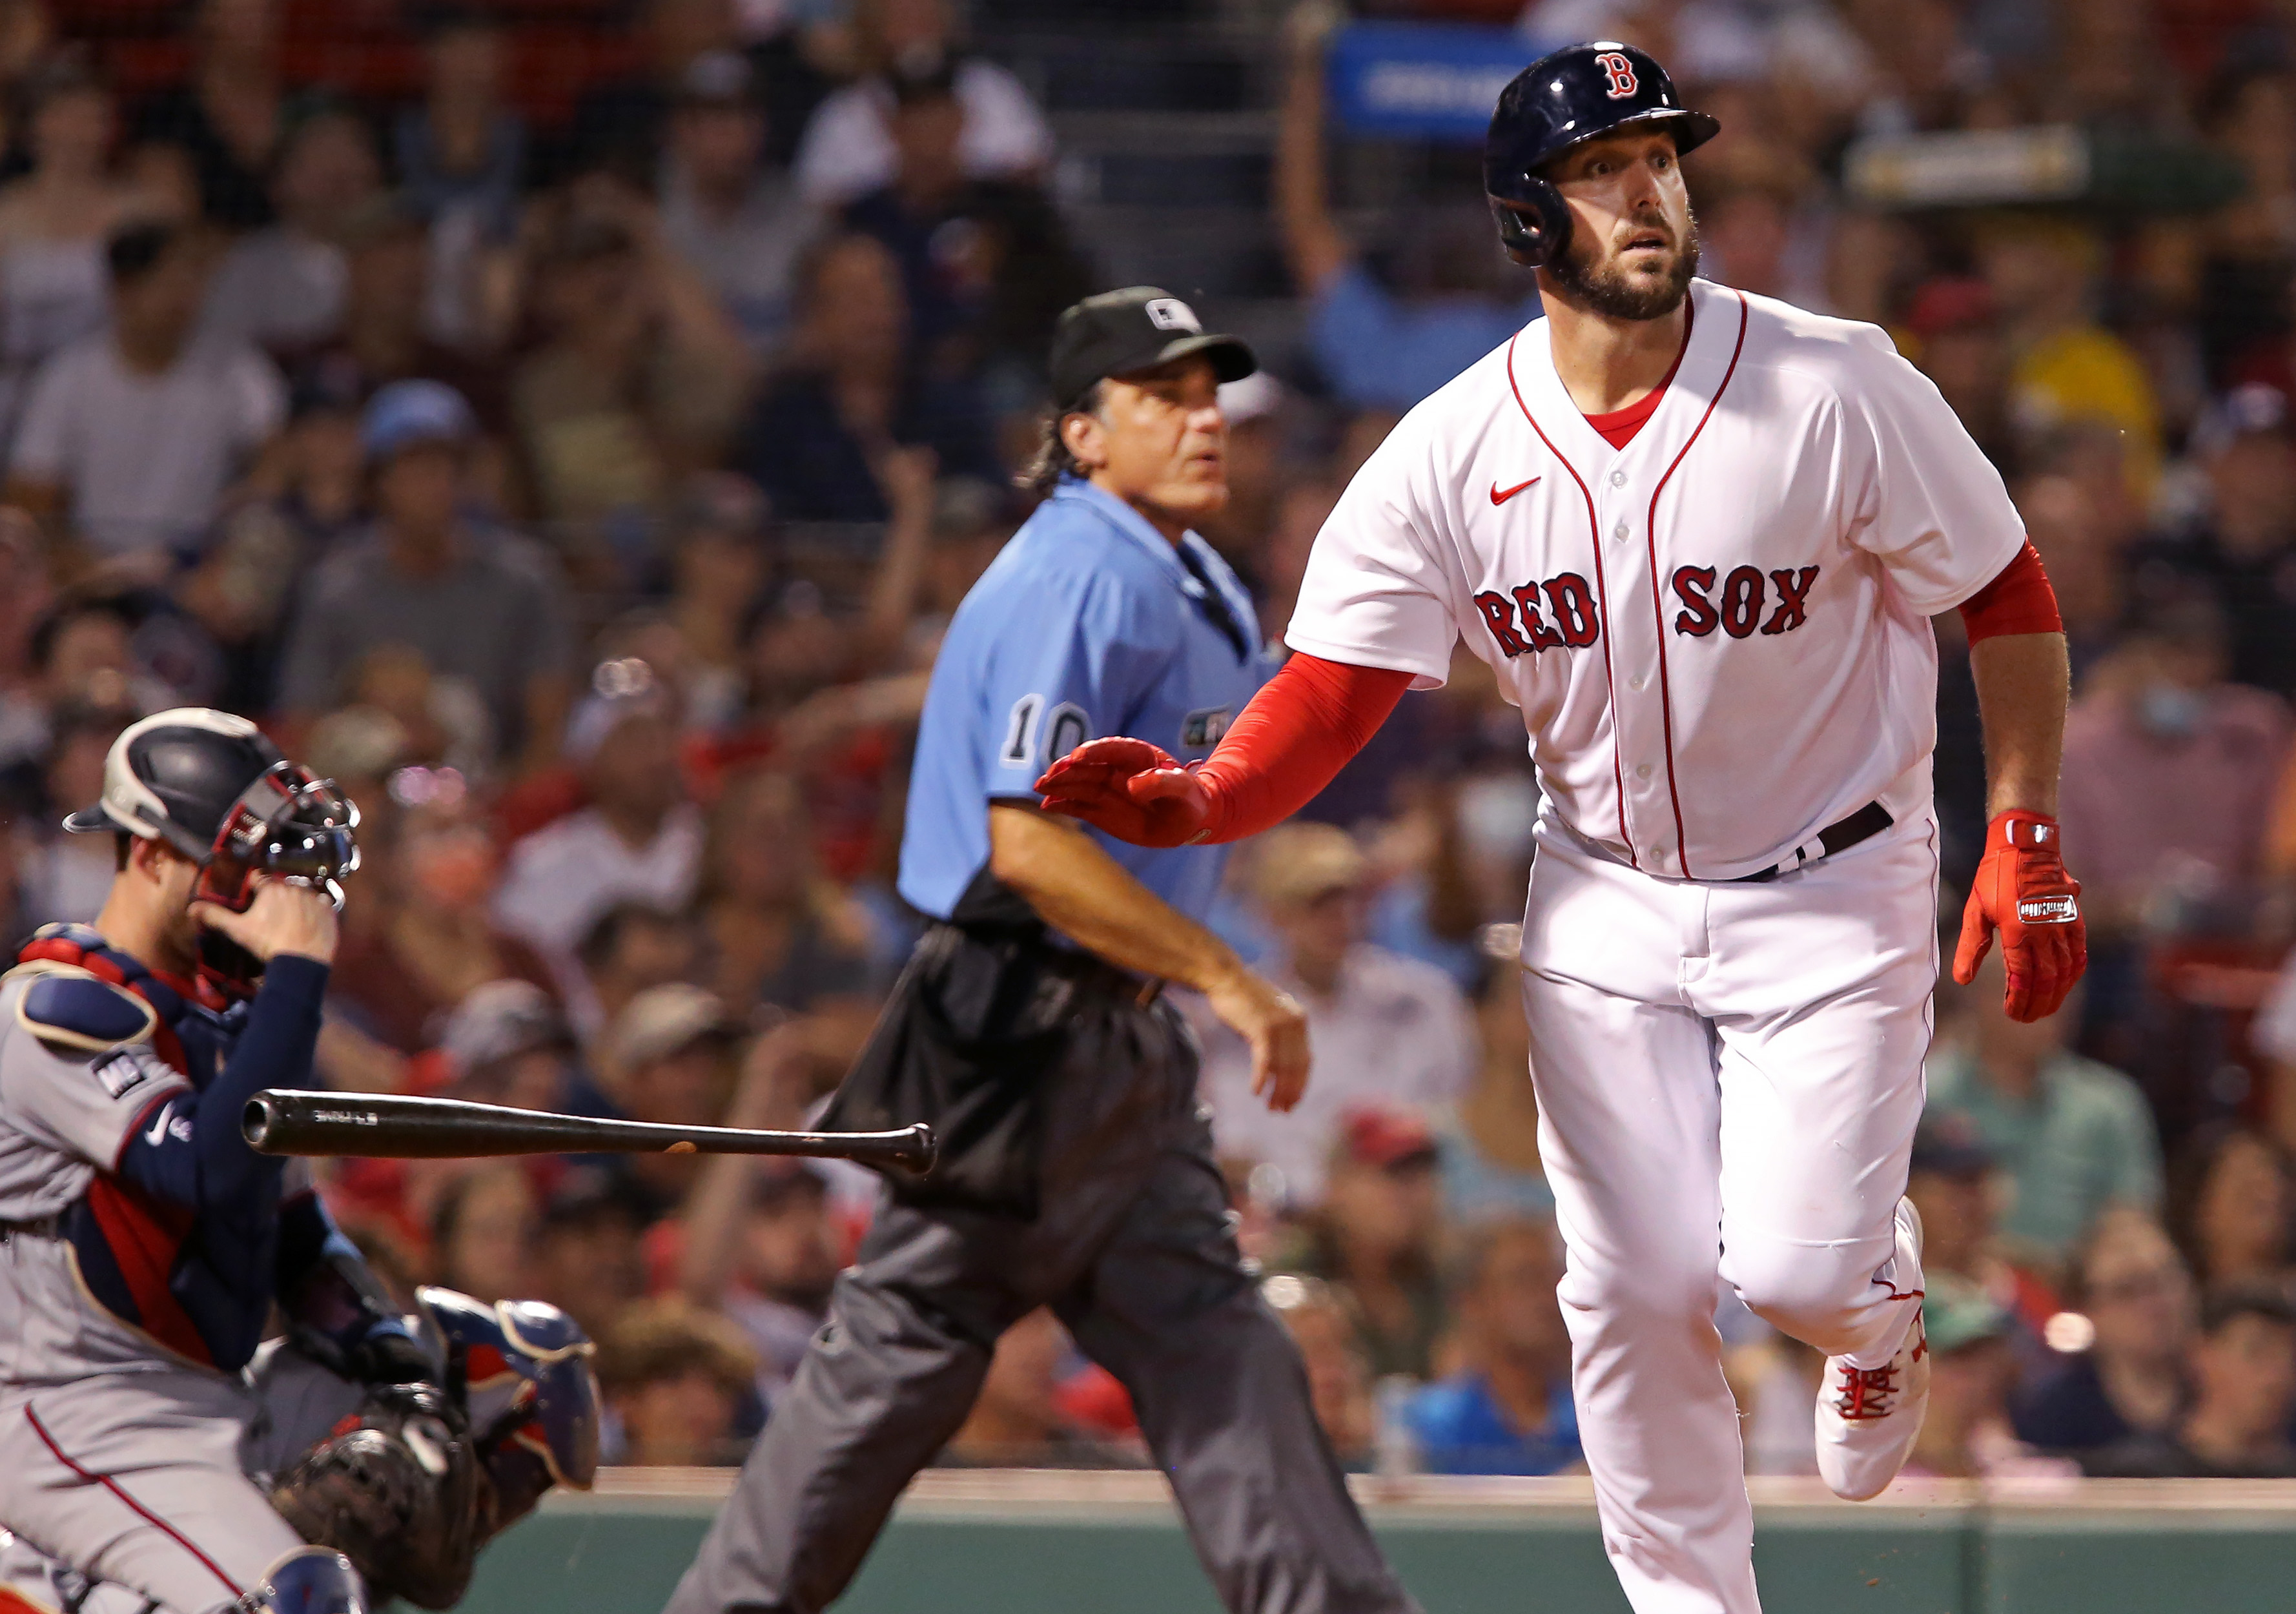 Red Sox rookie Travis Shaw breaking the stigma of being a